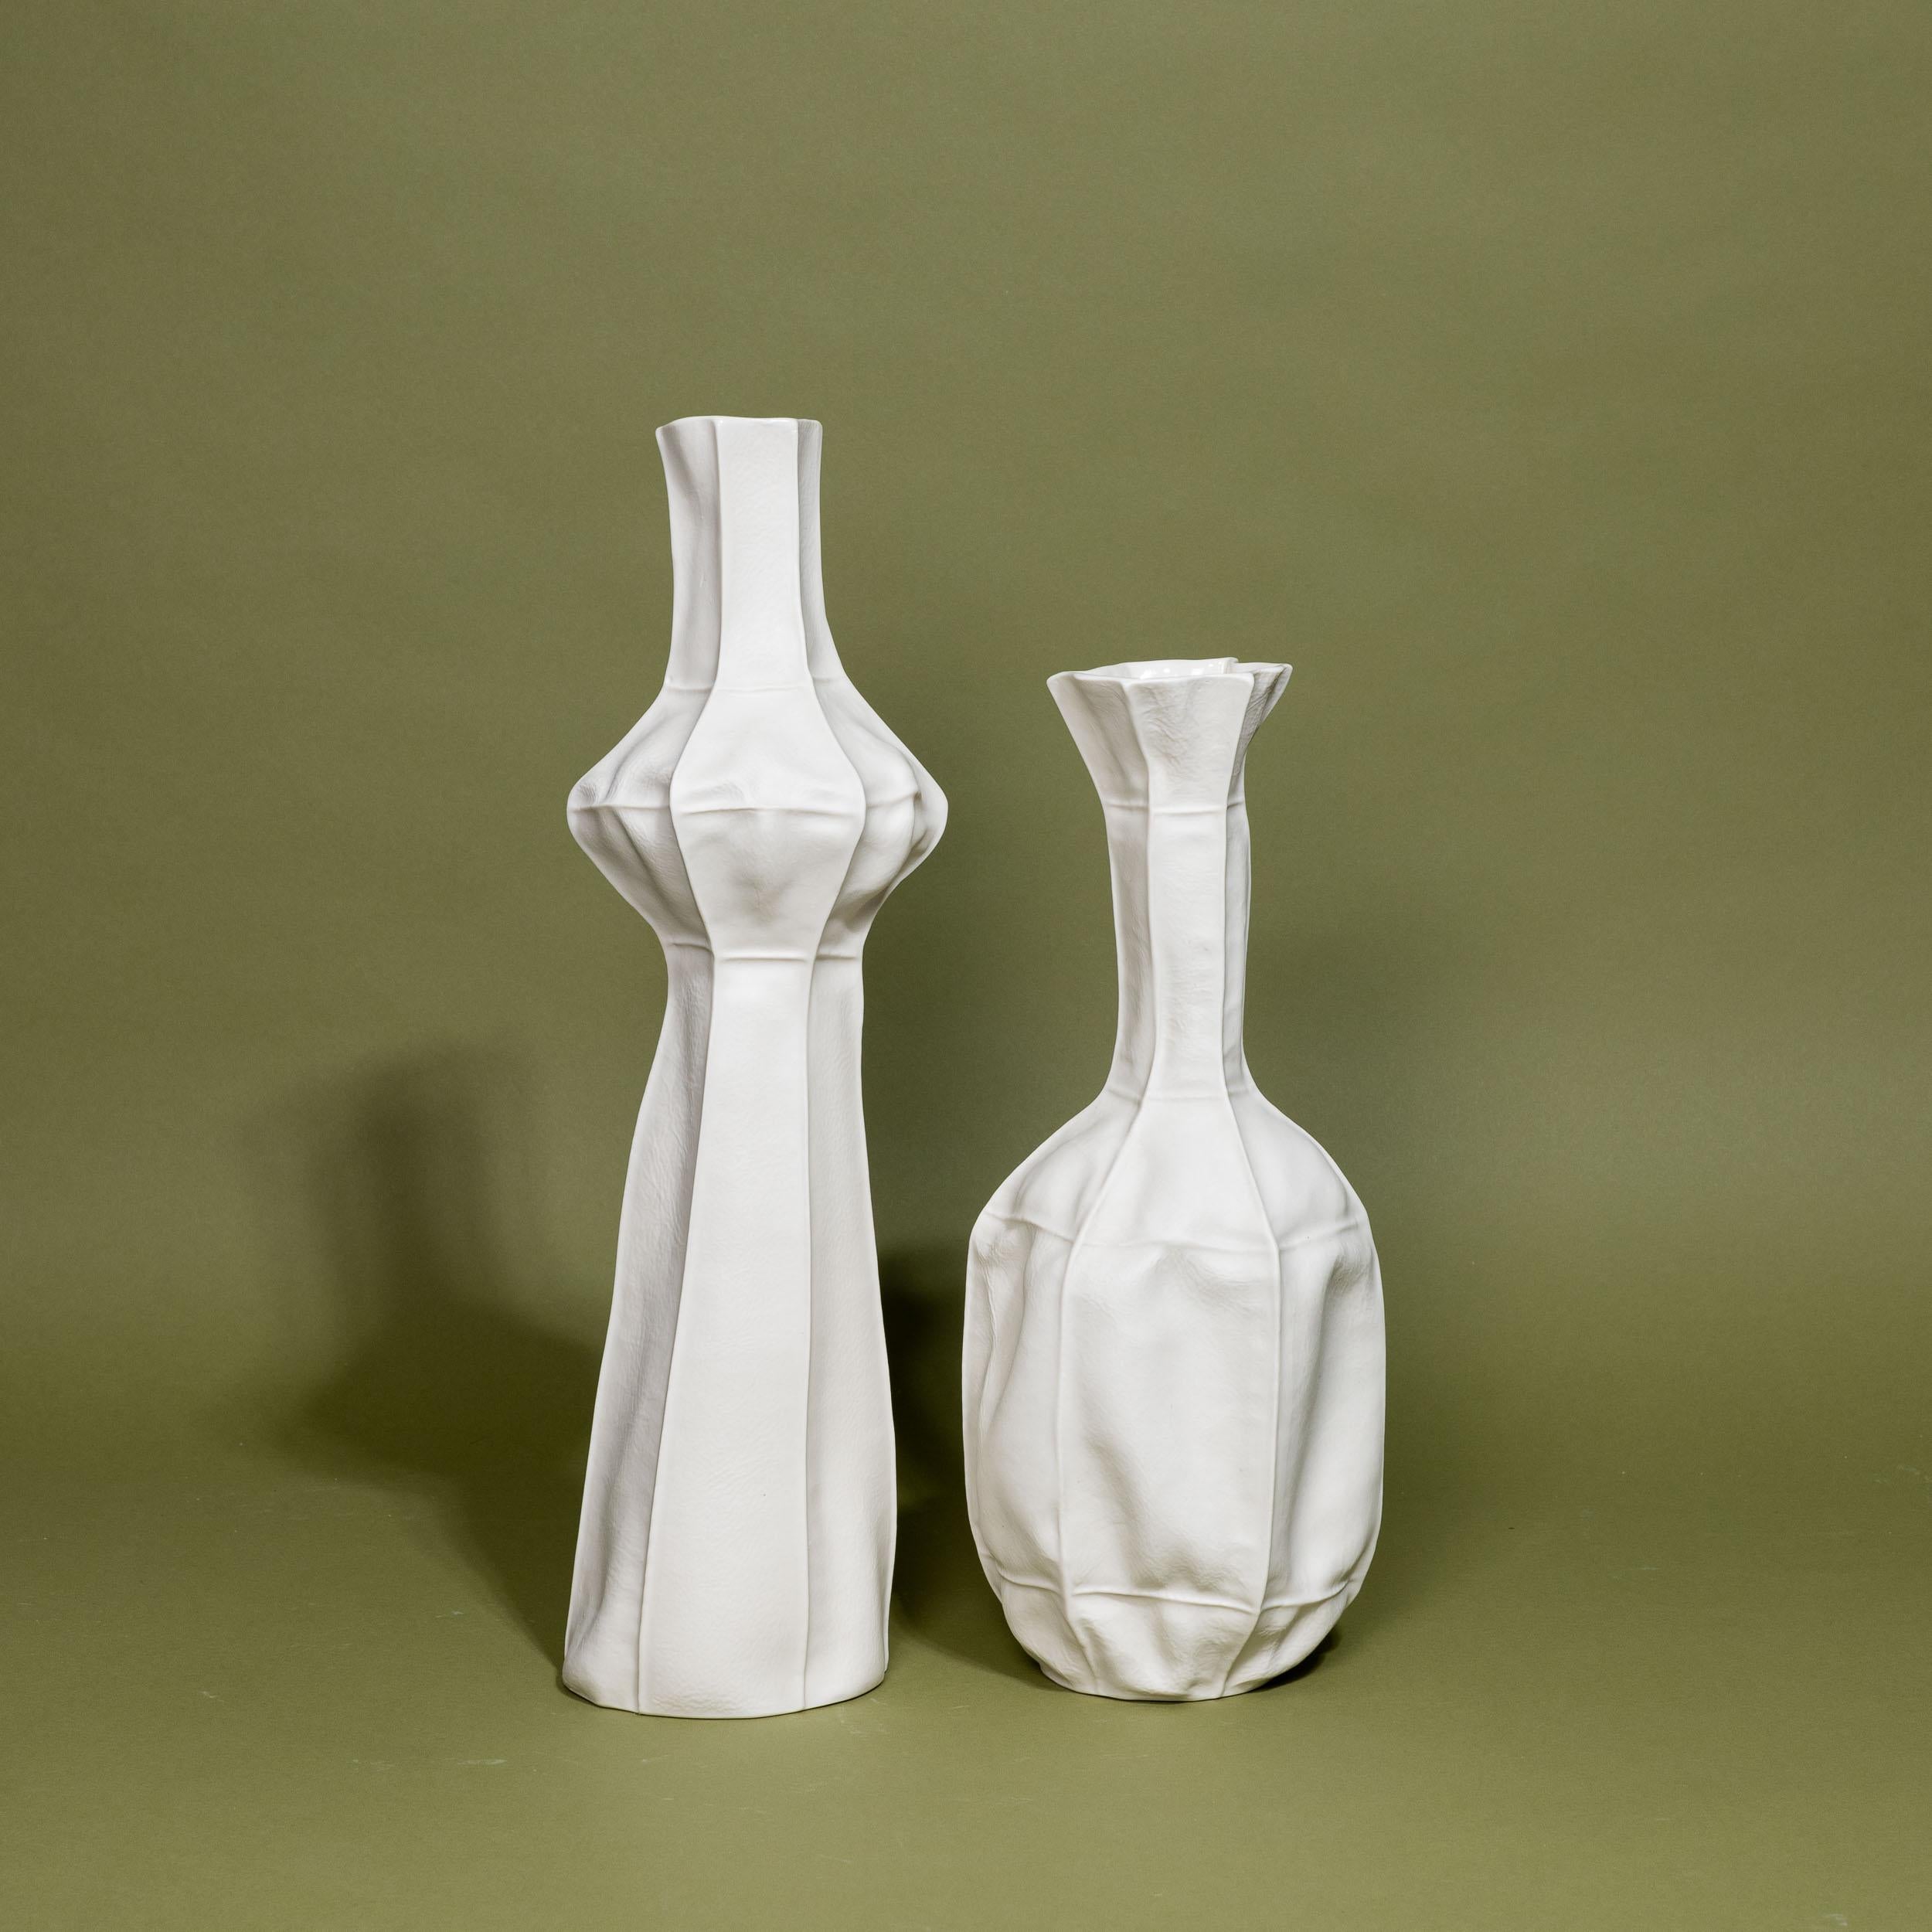 Modern Pair of Sculptural White Ceramic Kawa Vases, by Luft Tanaka, organic, porcelain For Sale